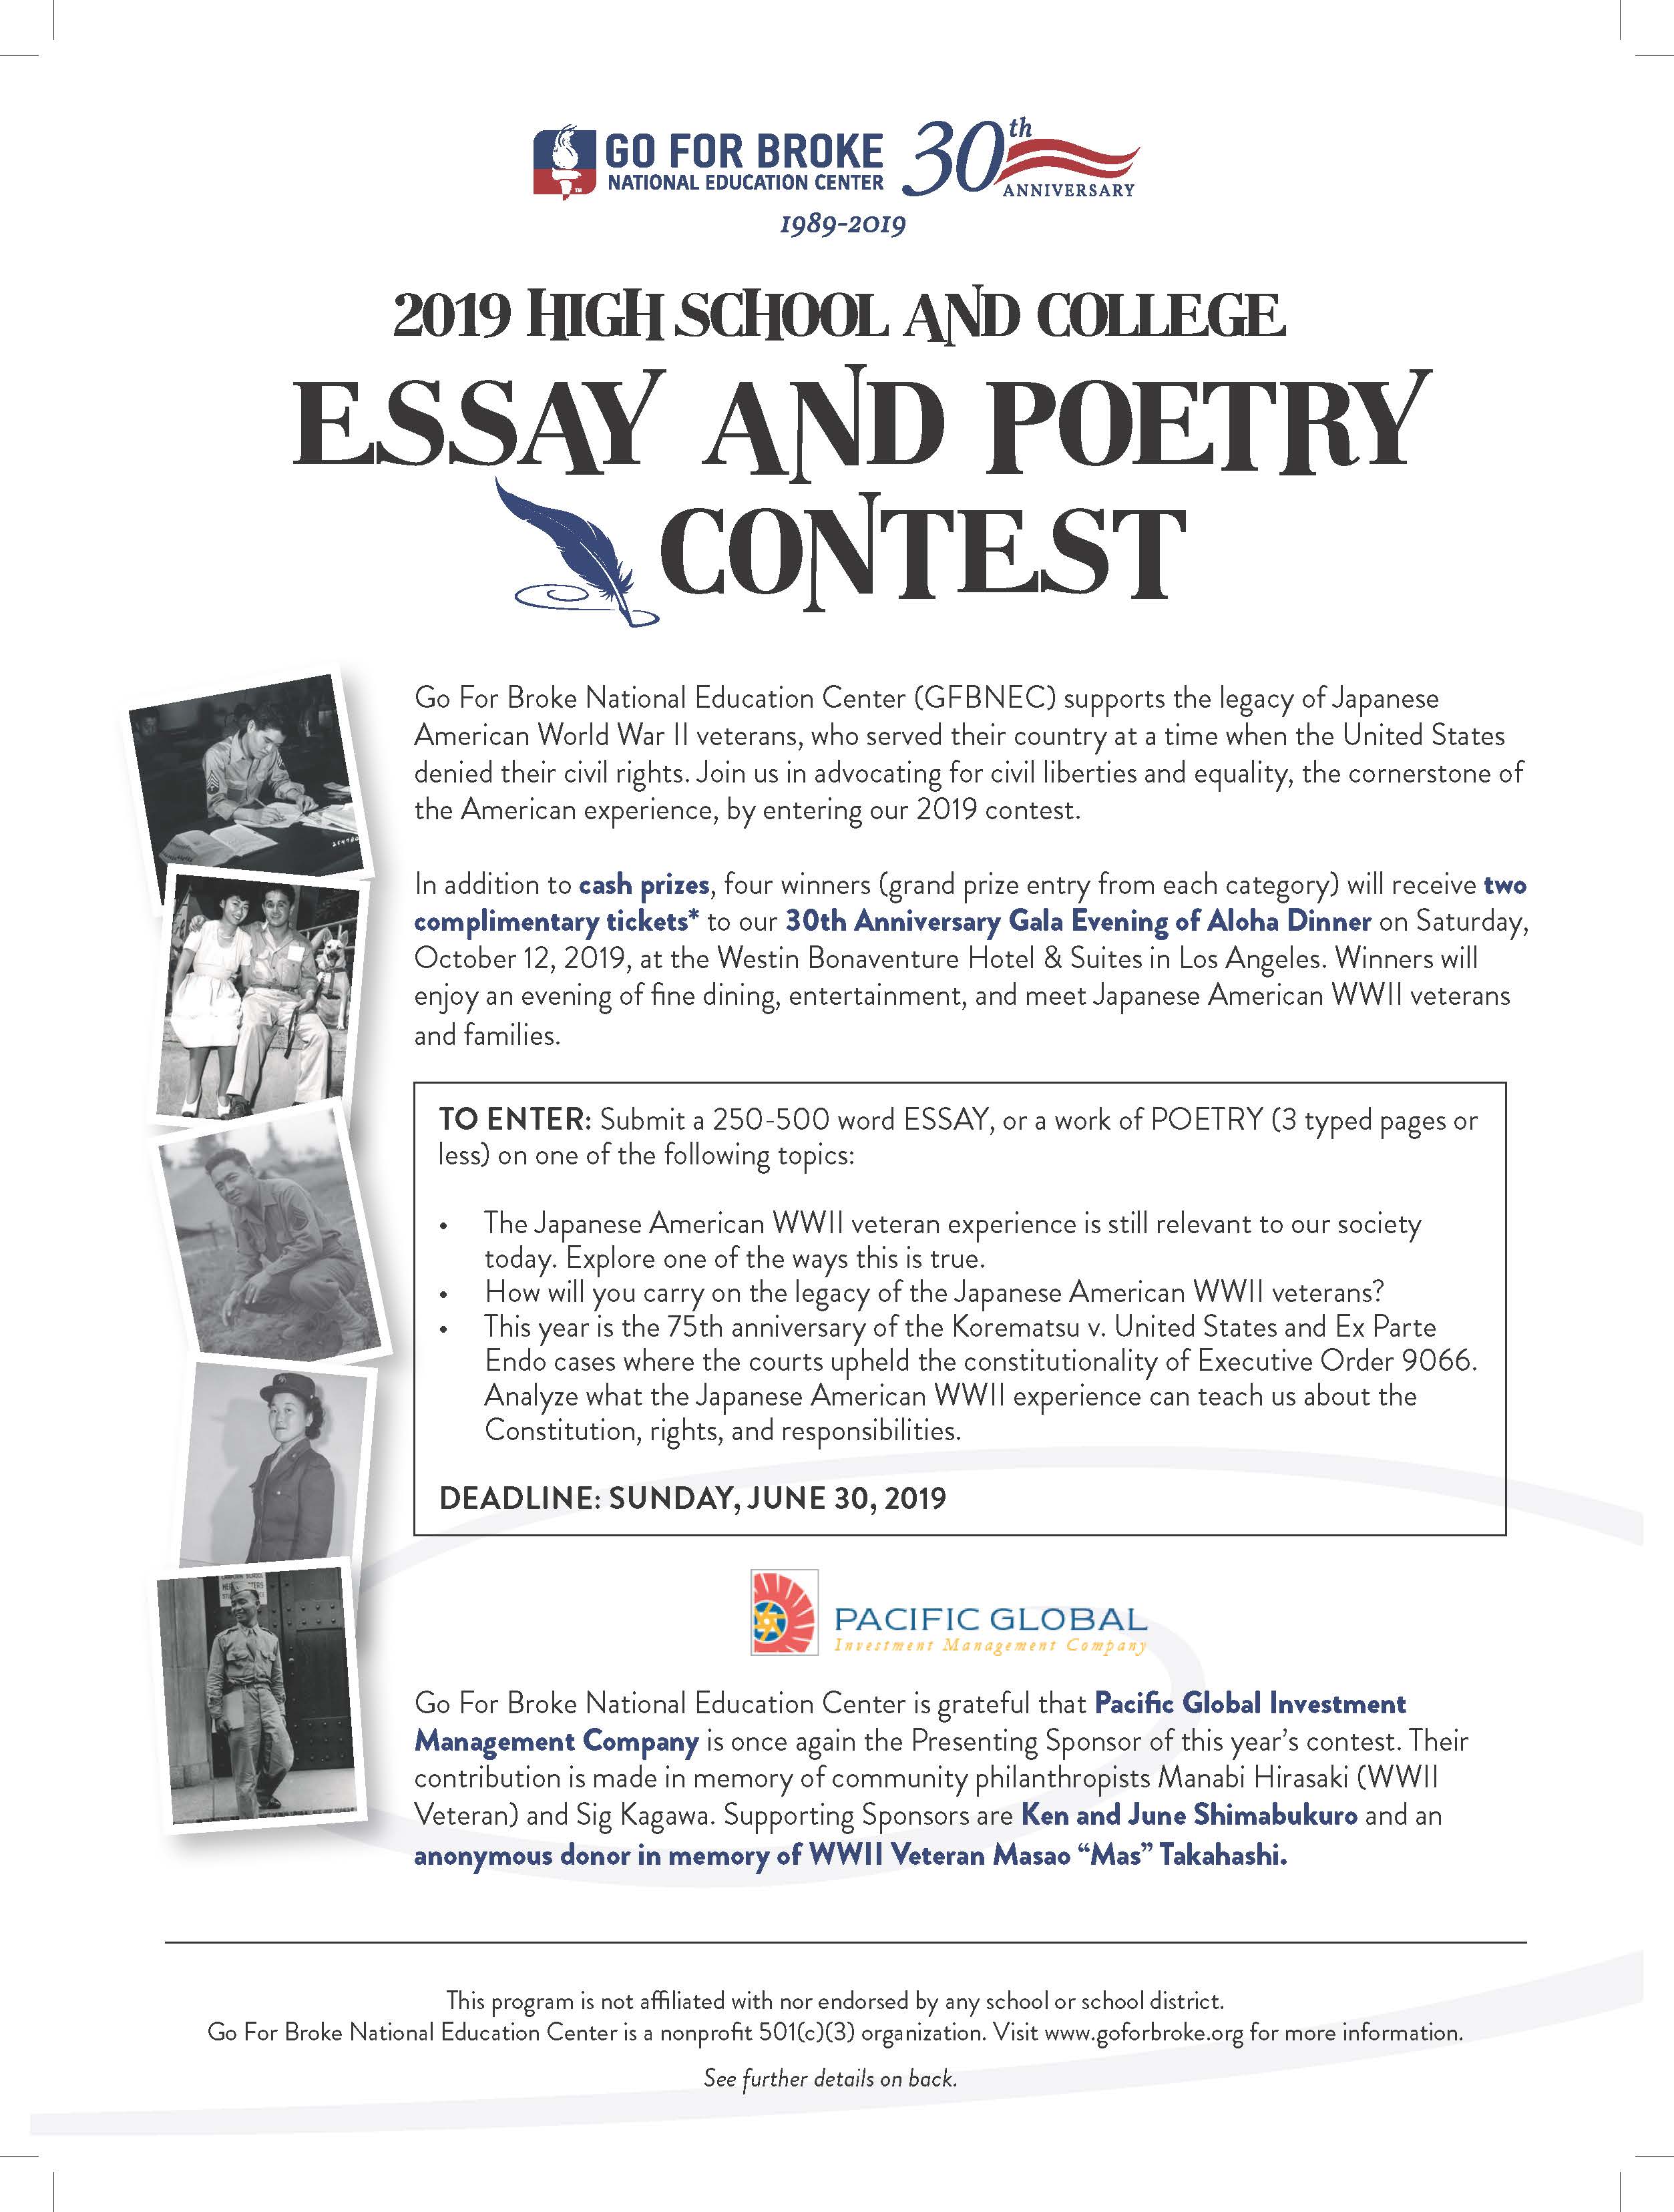 Essay contest for high school students